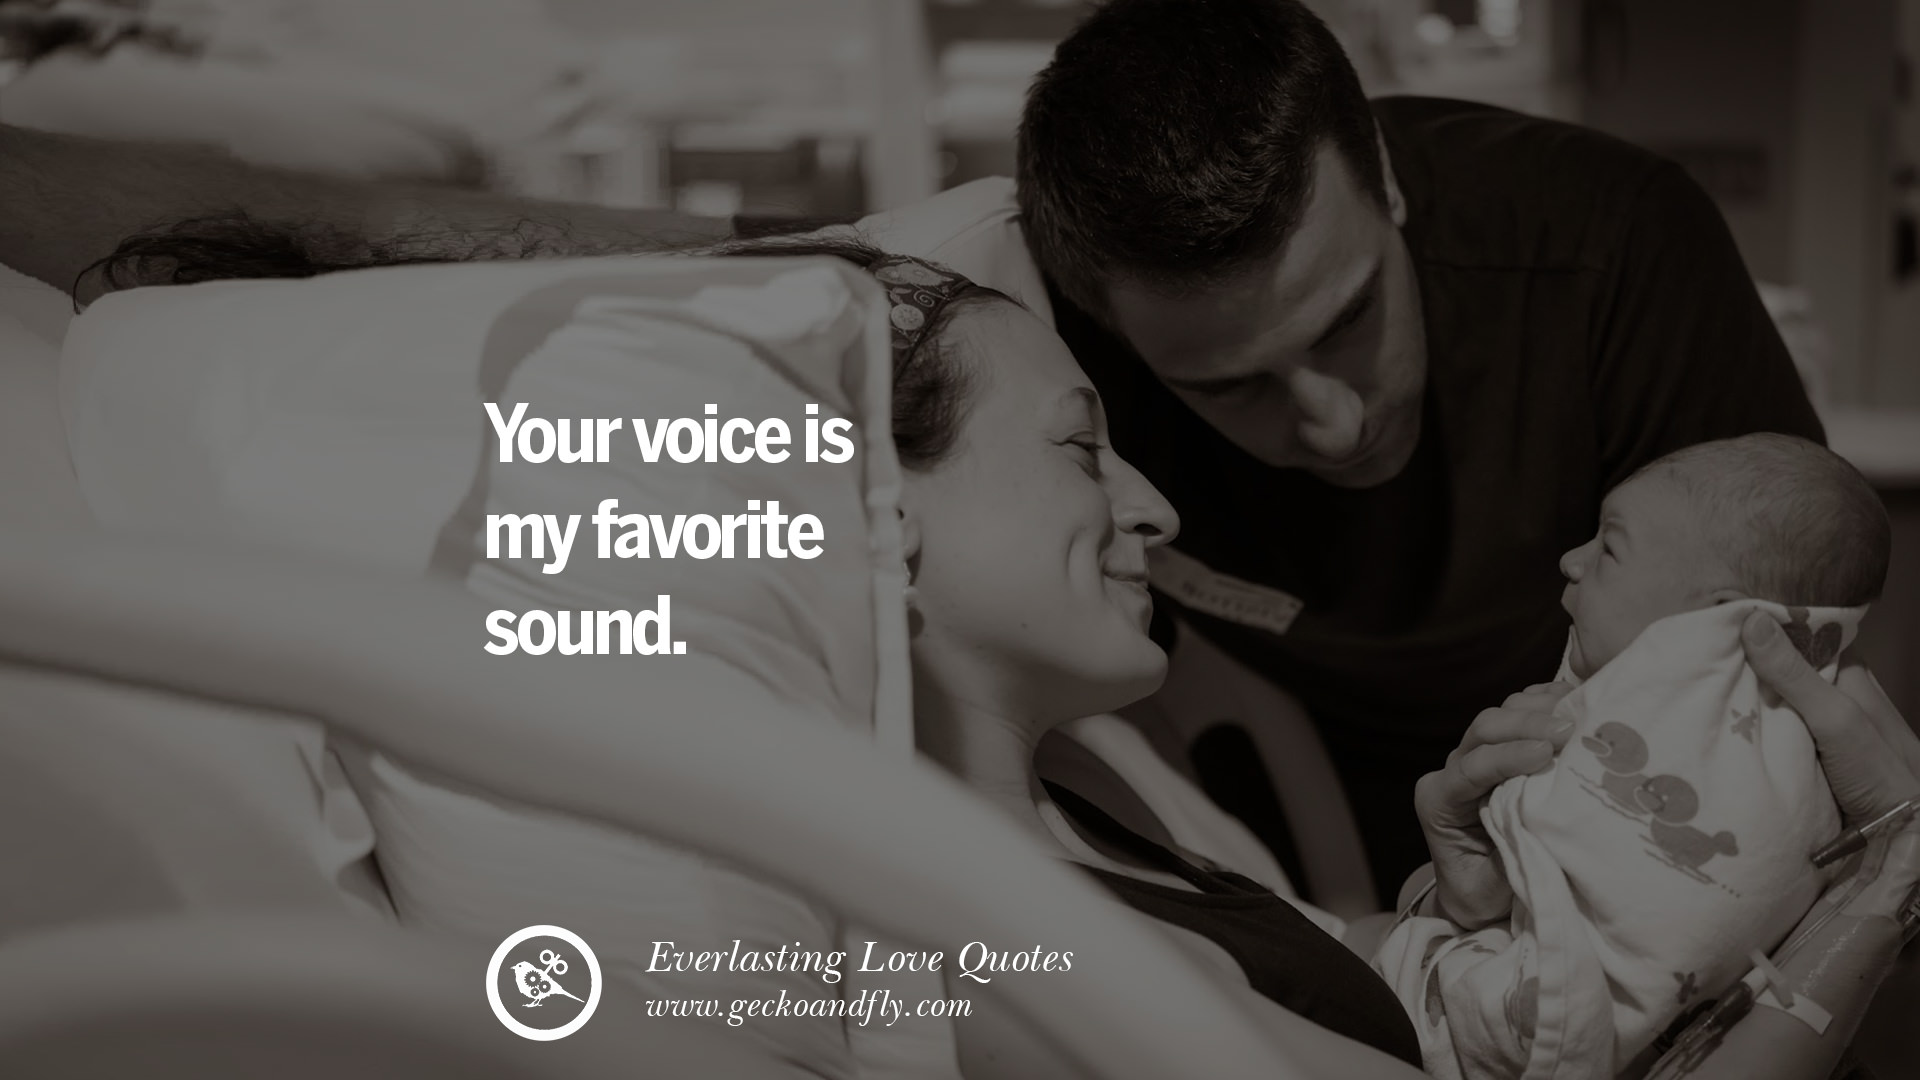 Your voice is my favorite sound tumblr instagram Romantic Love Quotes For Him and